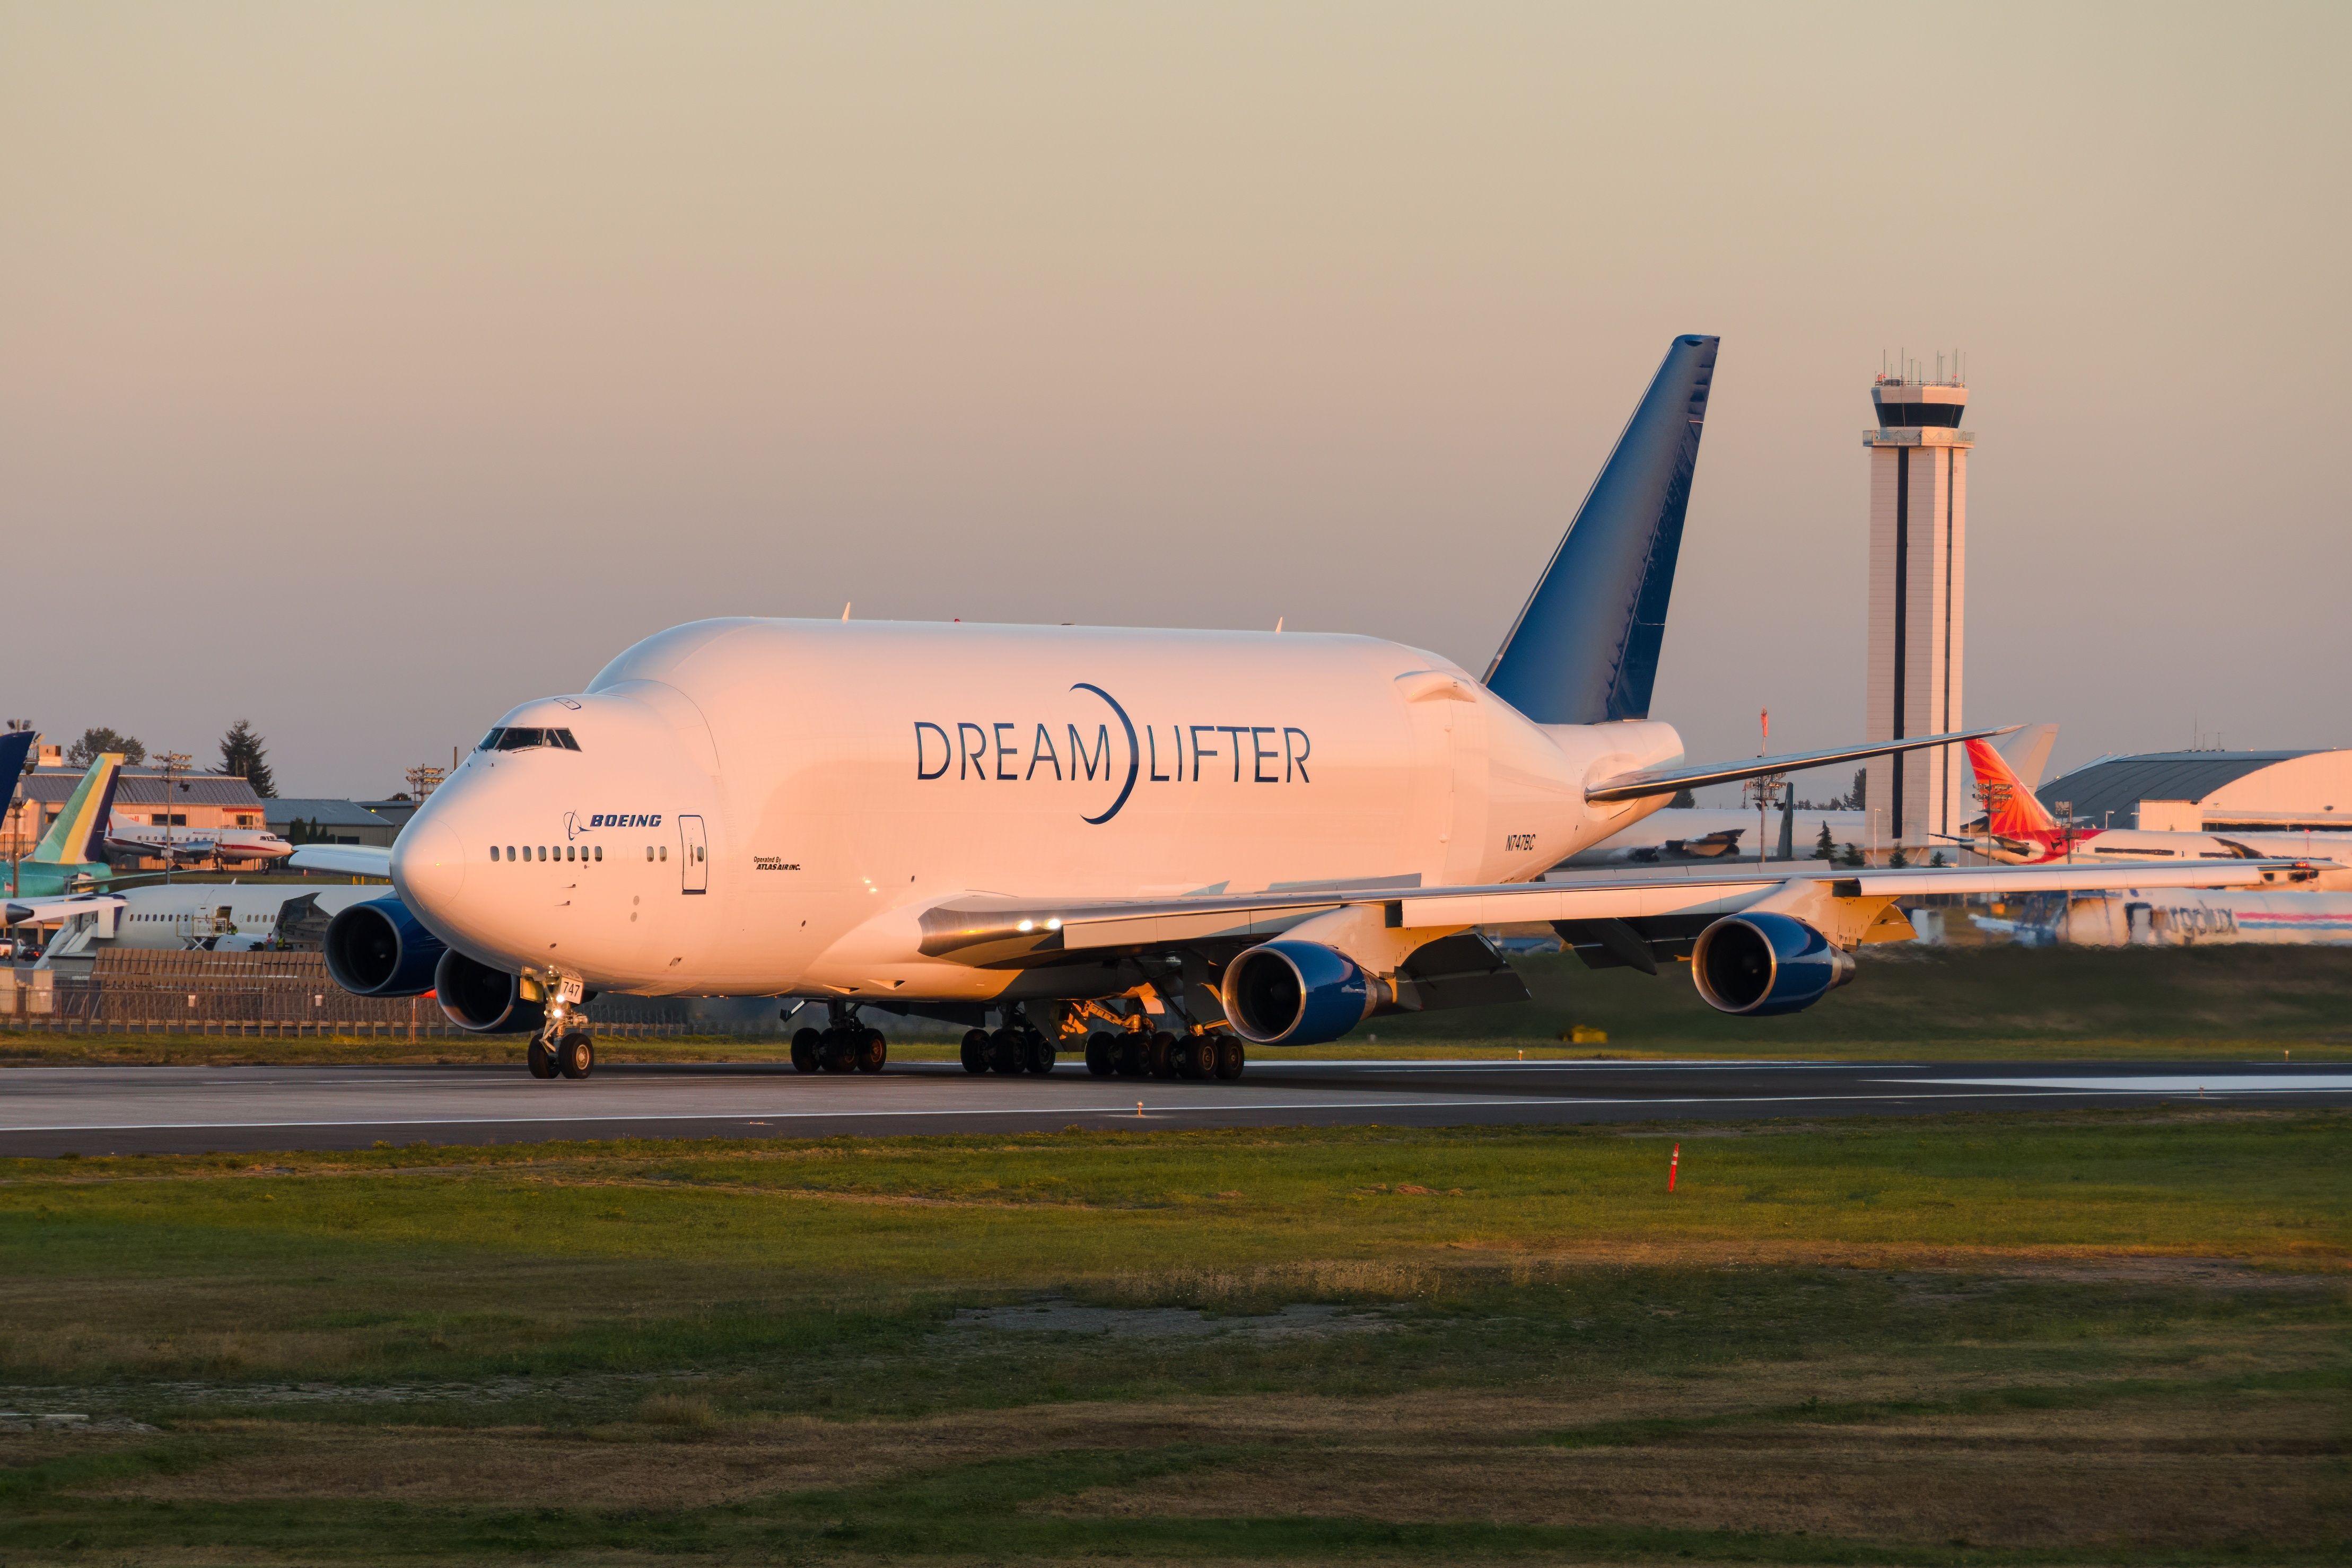 A Boeing Dreamlifter aircraft taxiing to the runway.